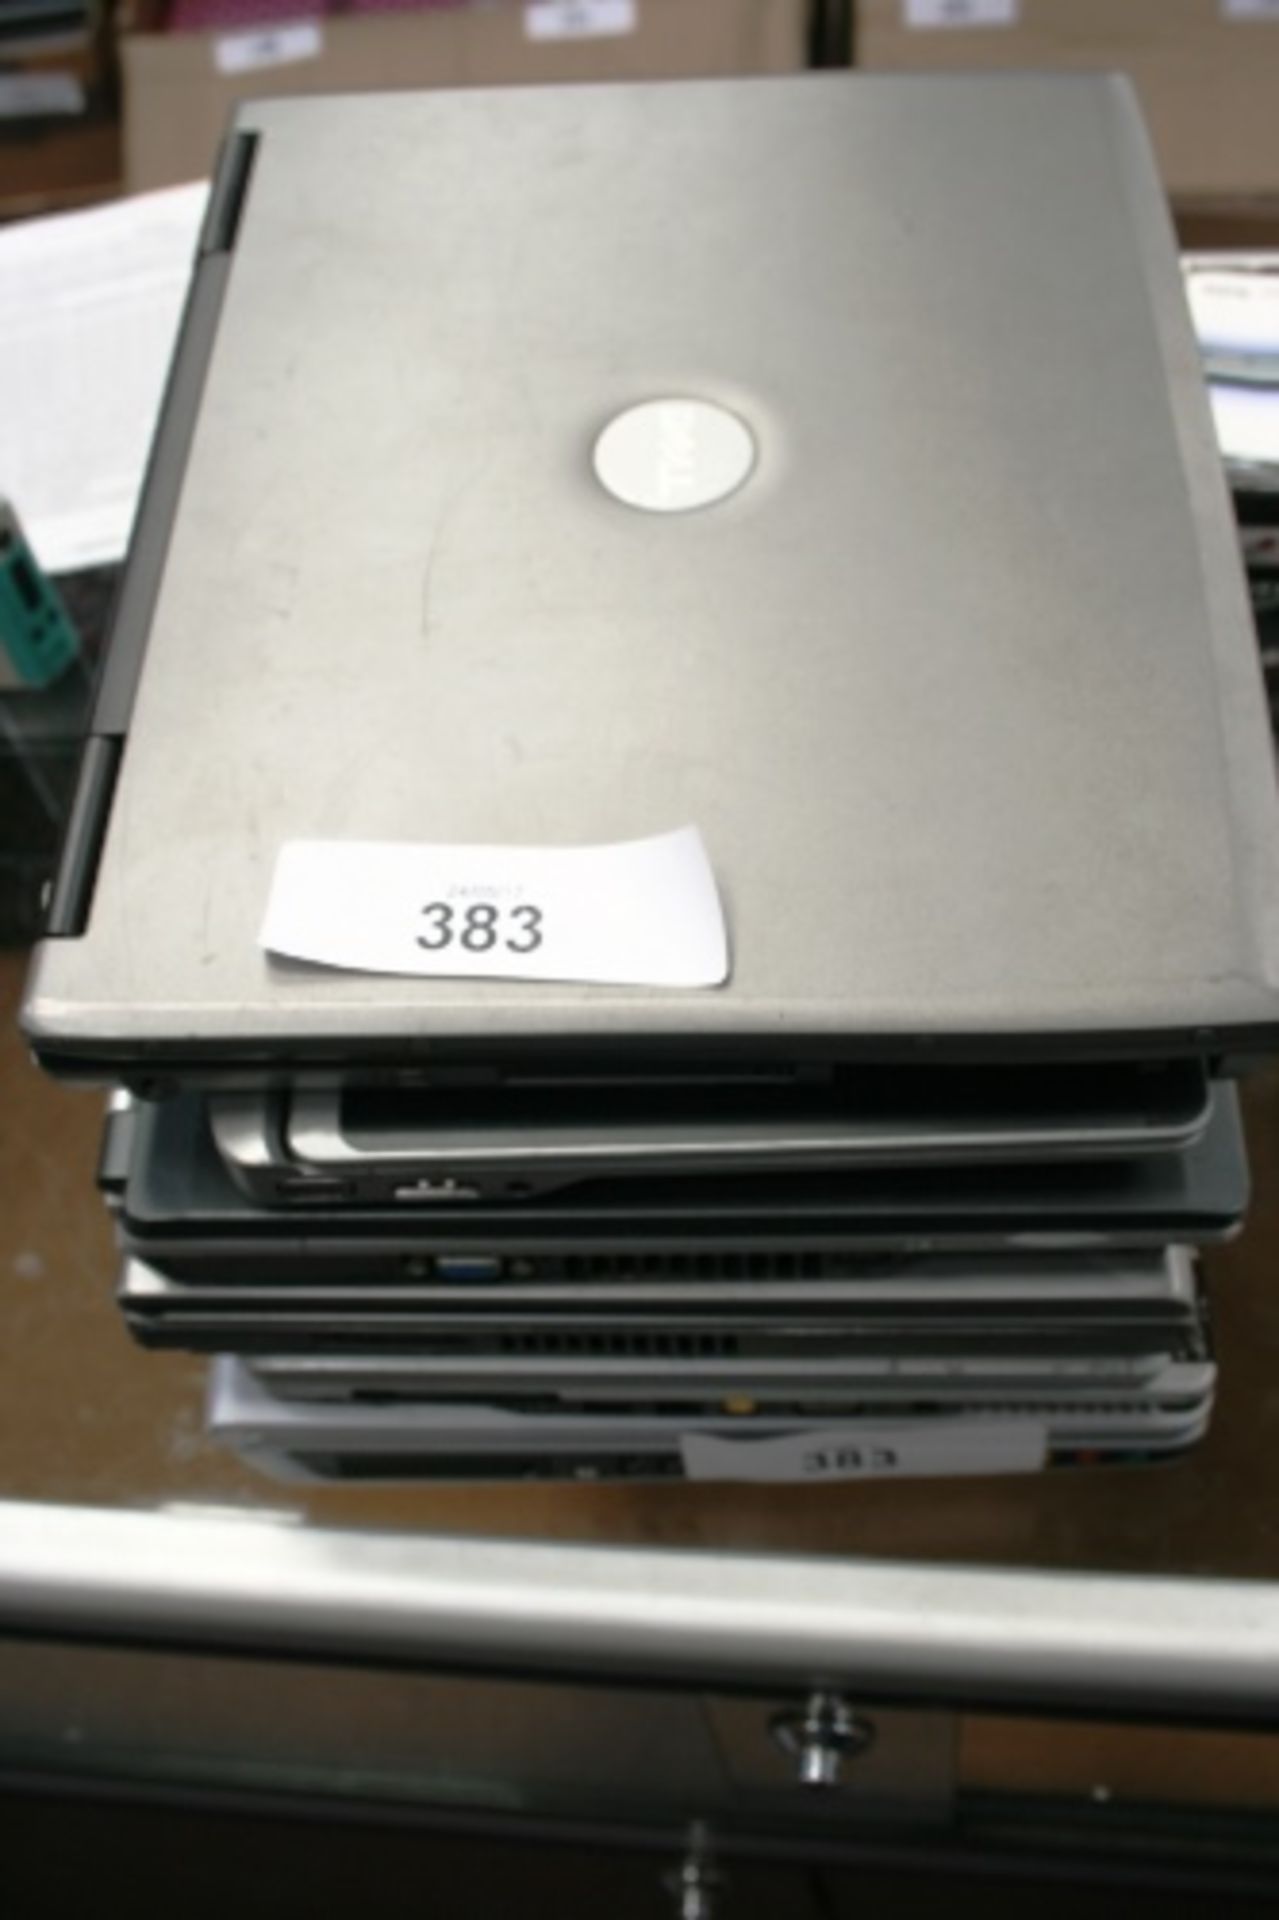 A mixed lot of 6 laptops including Sony, Siemens, Toshiba and Dell - Untested, spares & repairs (